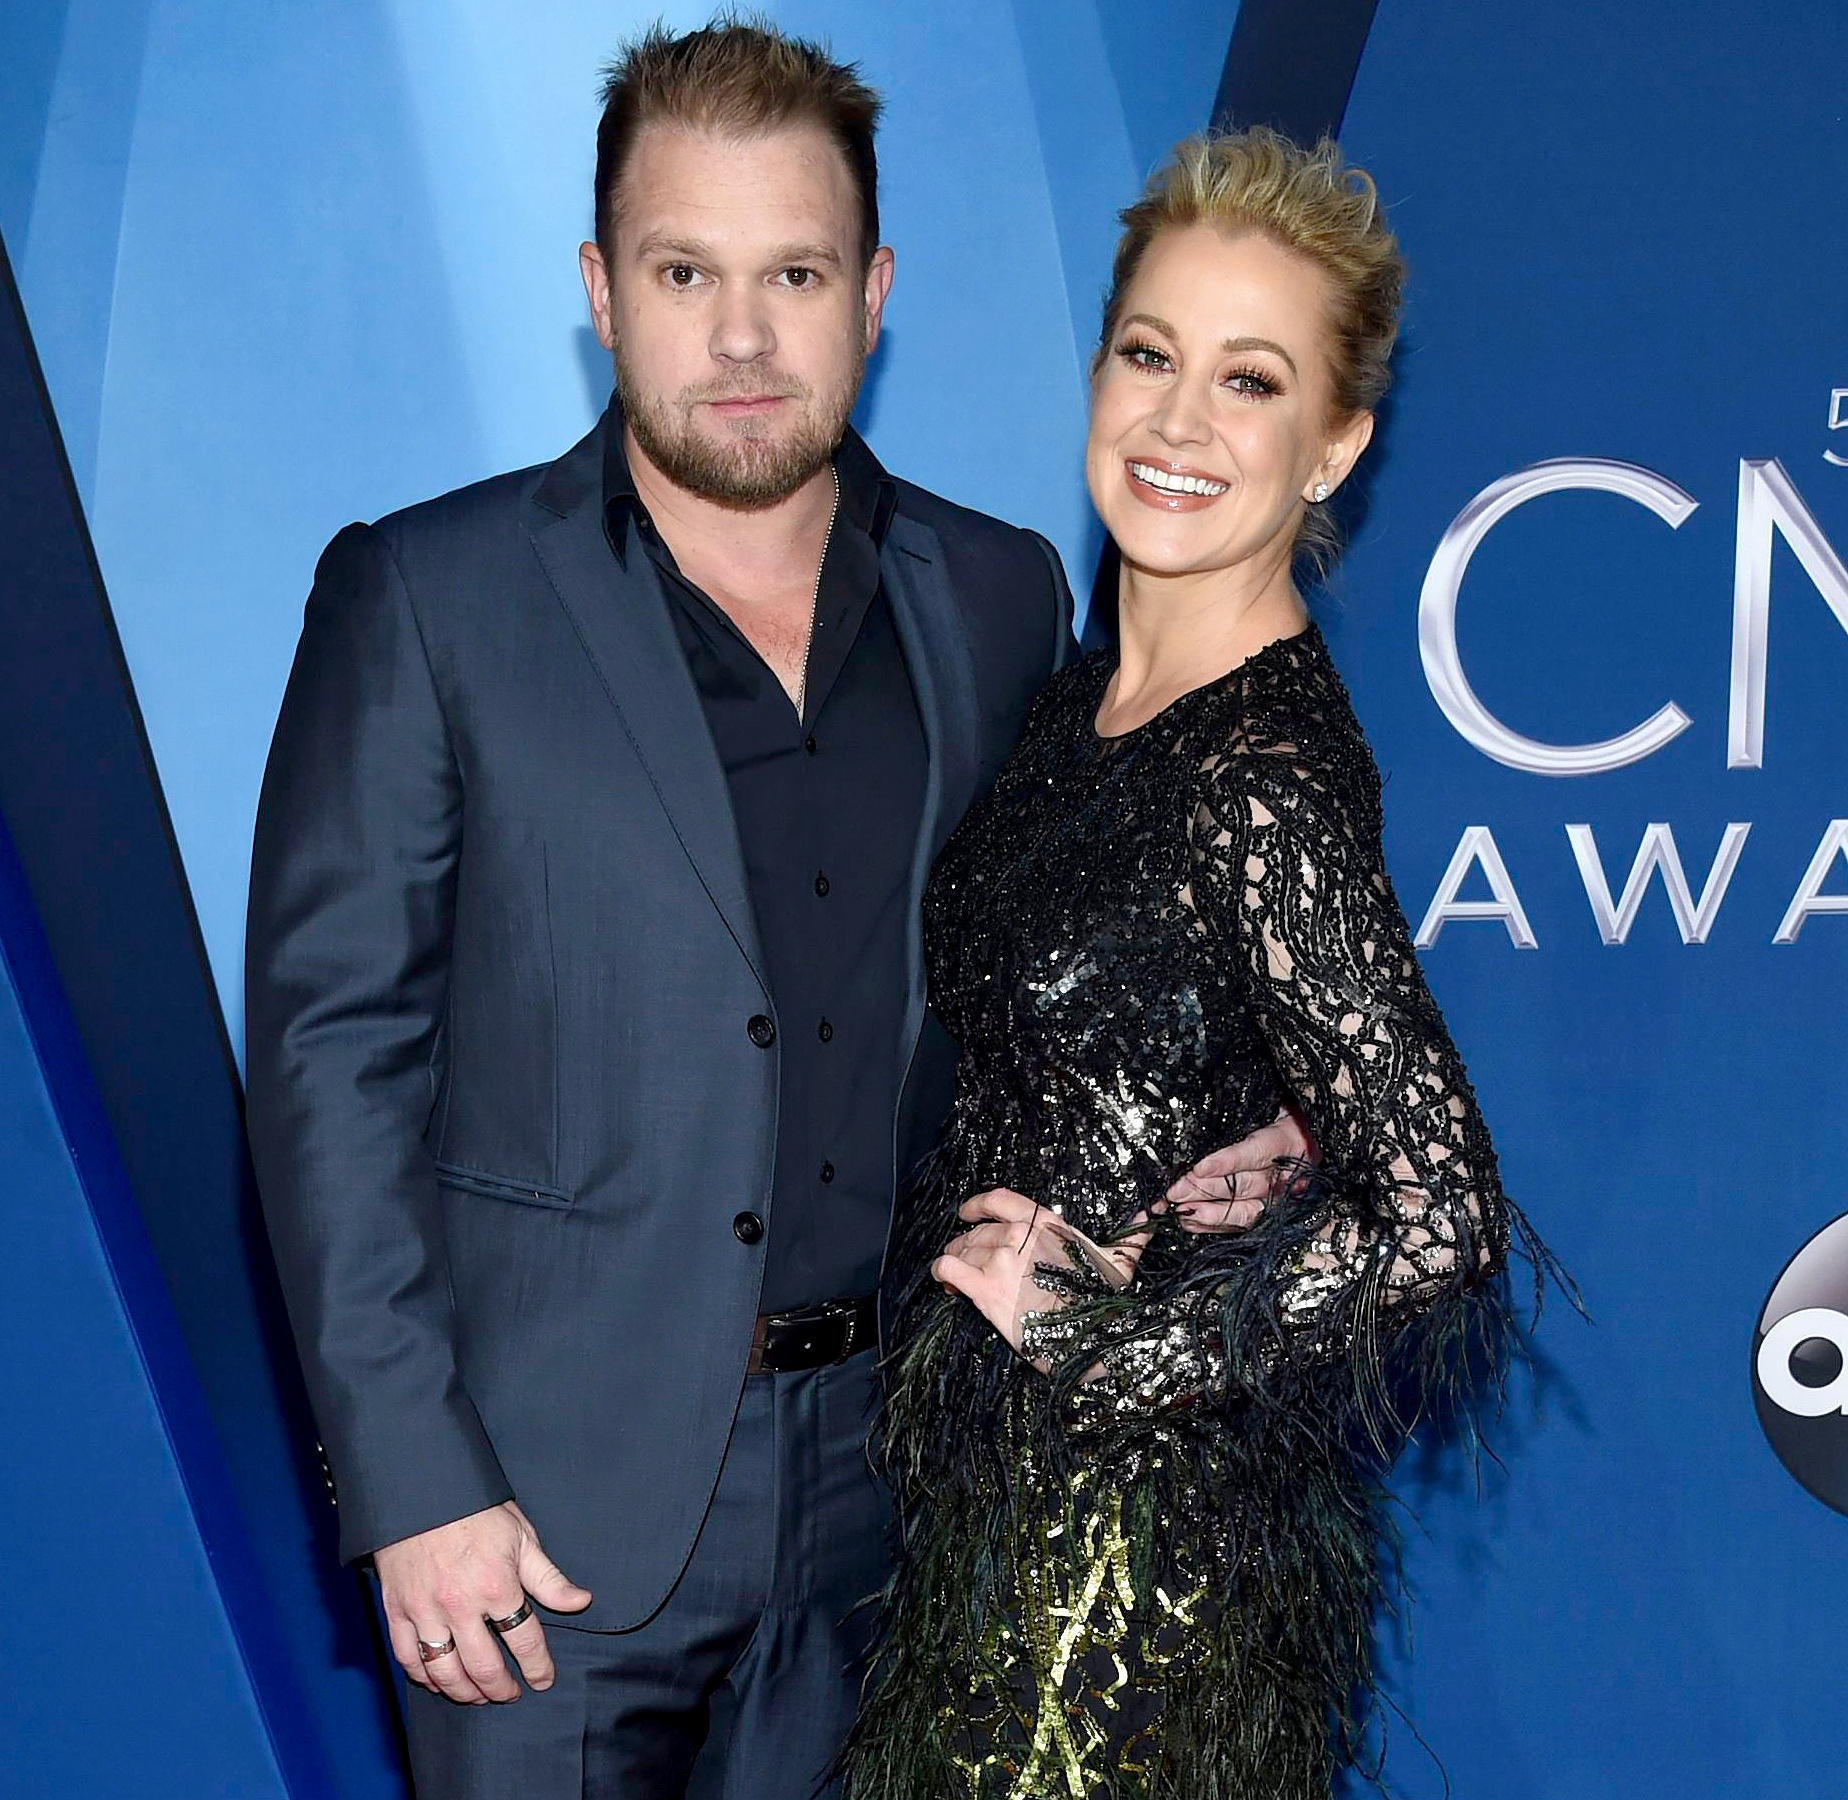 Kellie Pickler Wont Have Quarantine Baby With Husband Kyle Jacobs pic pic